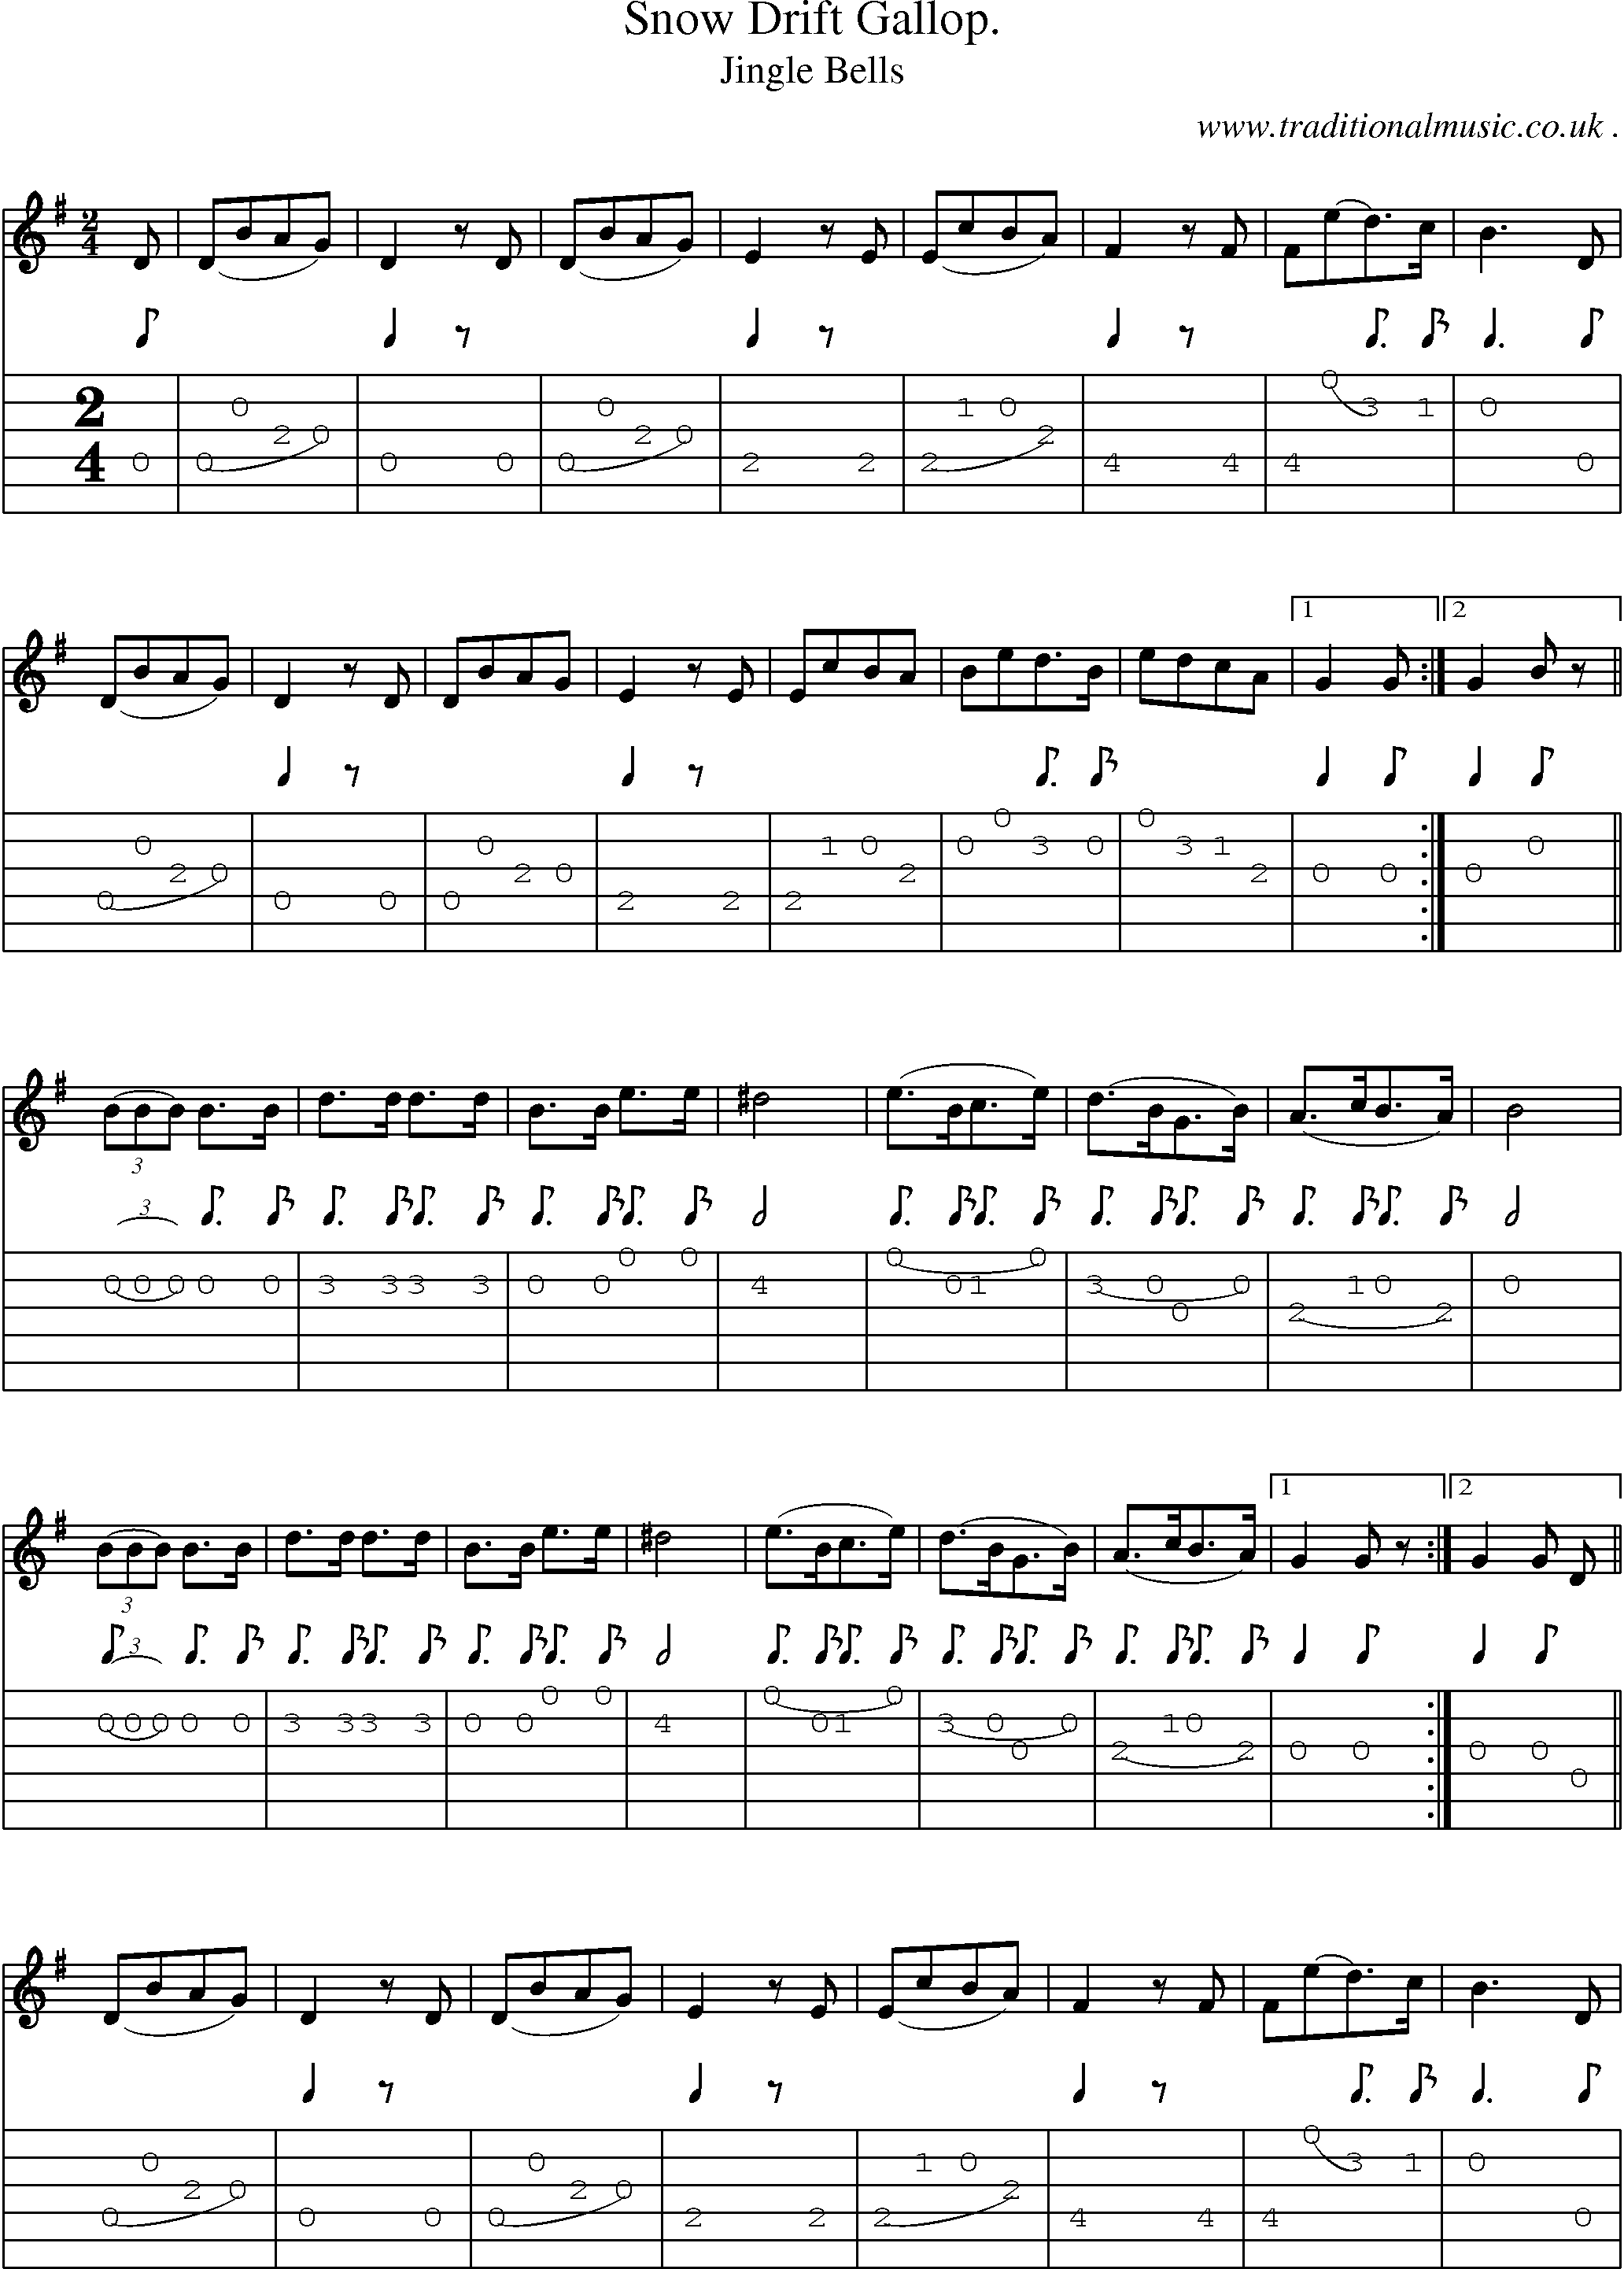 Sheet-Music and Guitar Tabs for Snow Drift Gallop